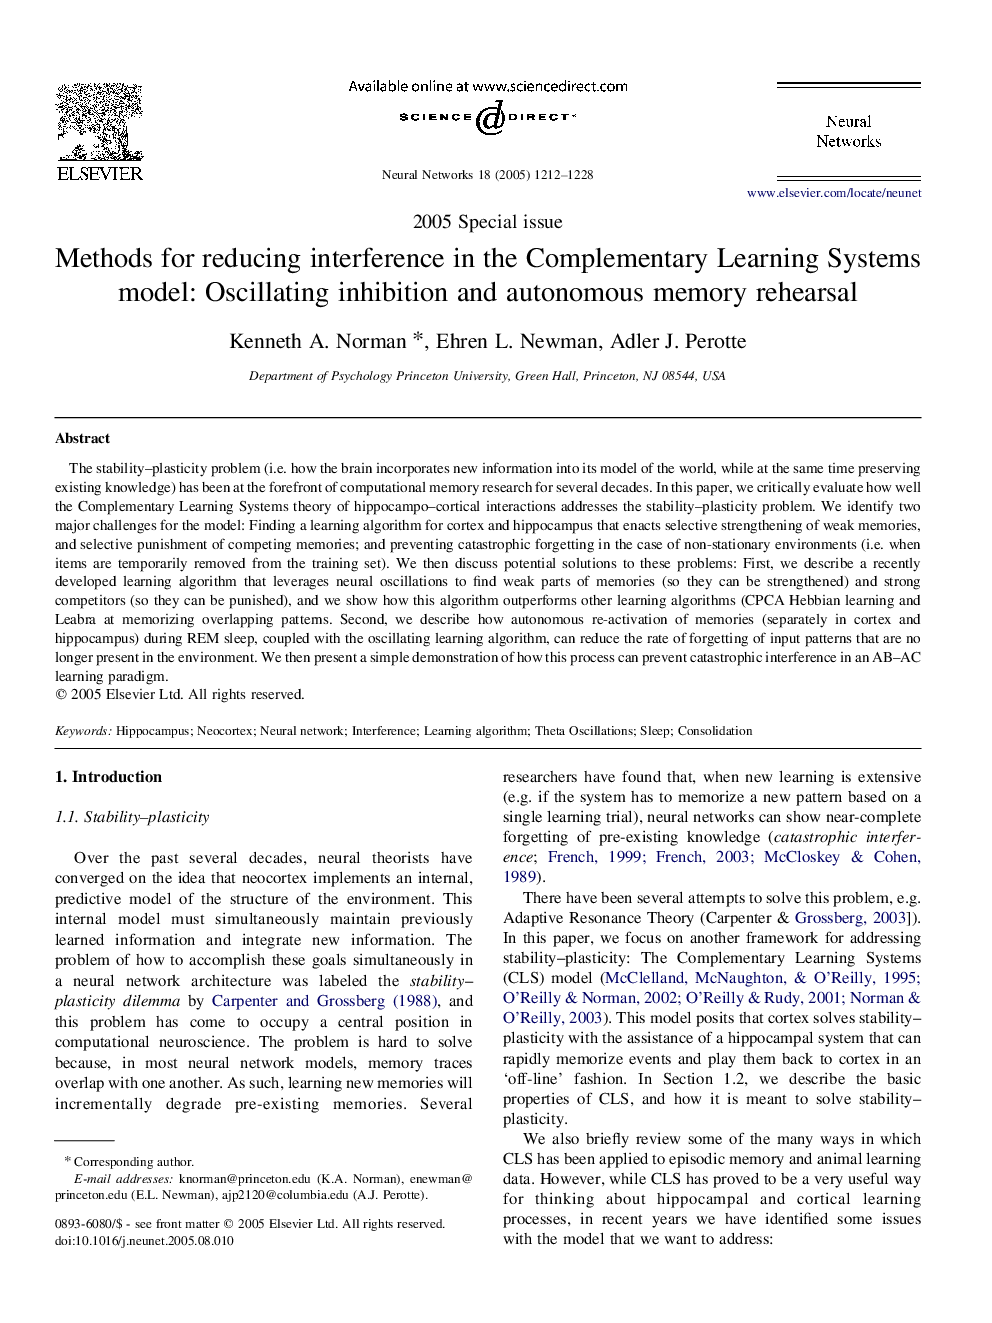 Methods for reducing interference in the Complementary Learning Systems model: Oscillating inhibition and autonomous memory rehearsal